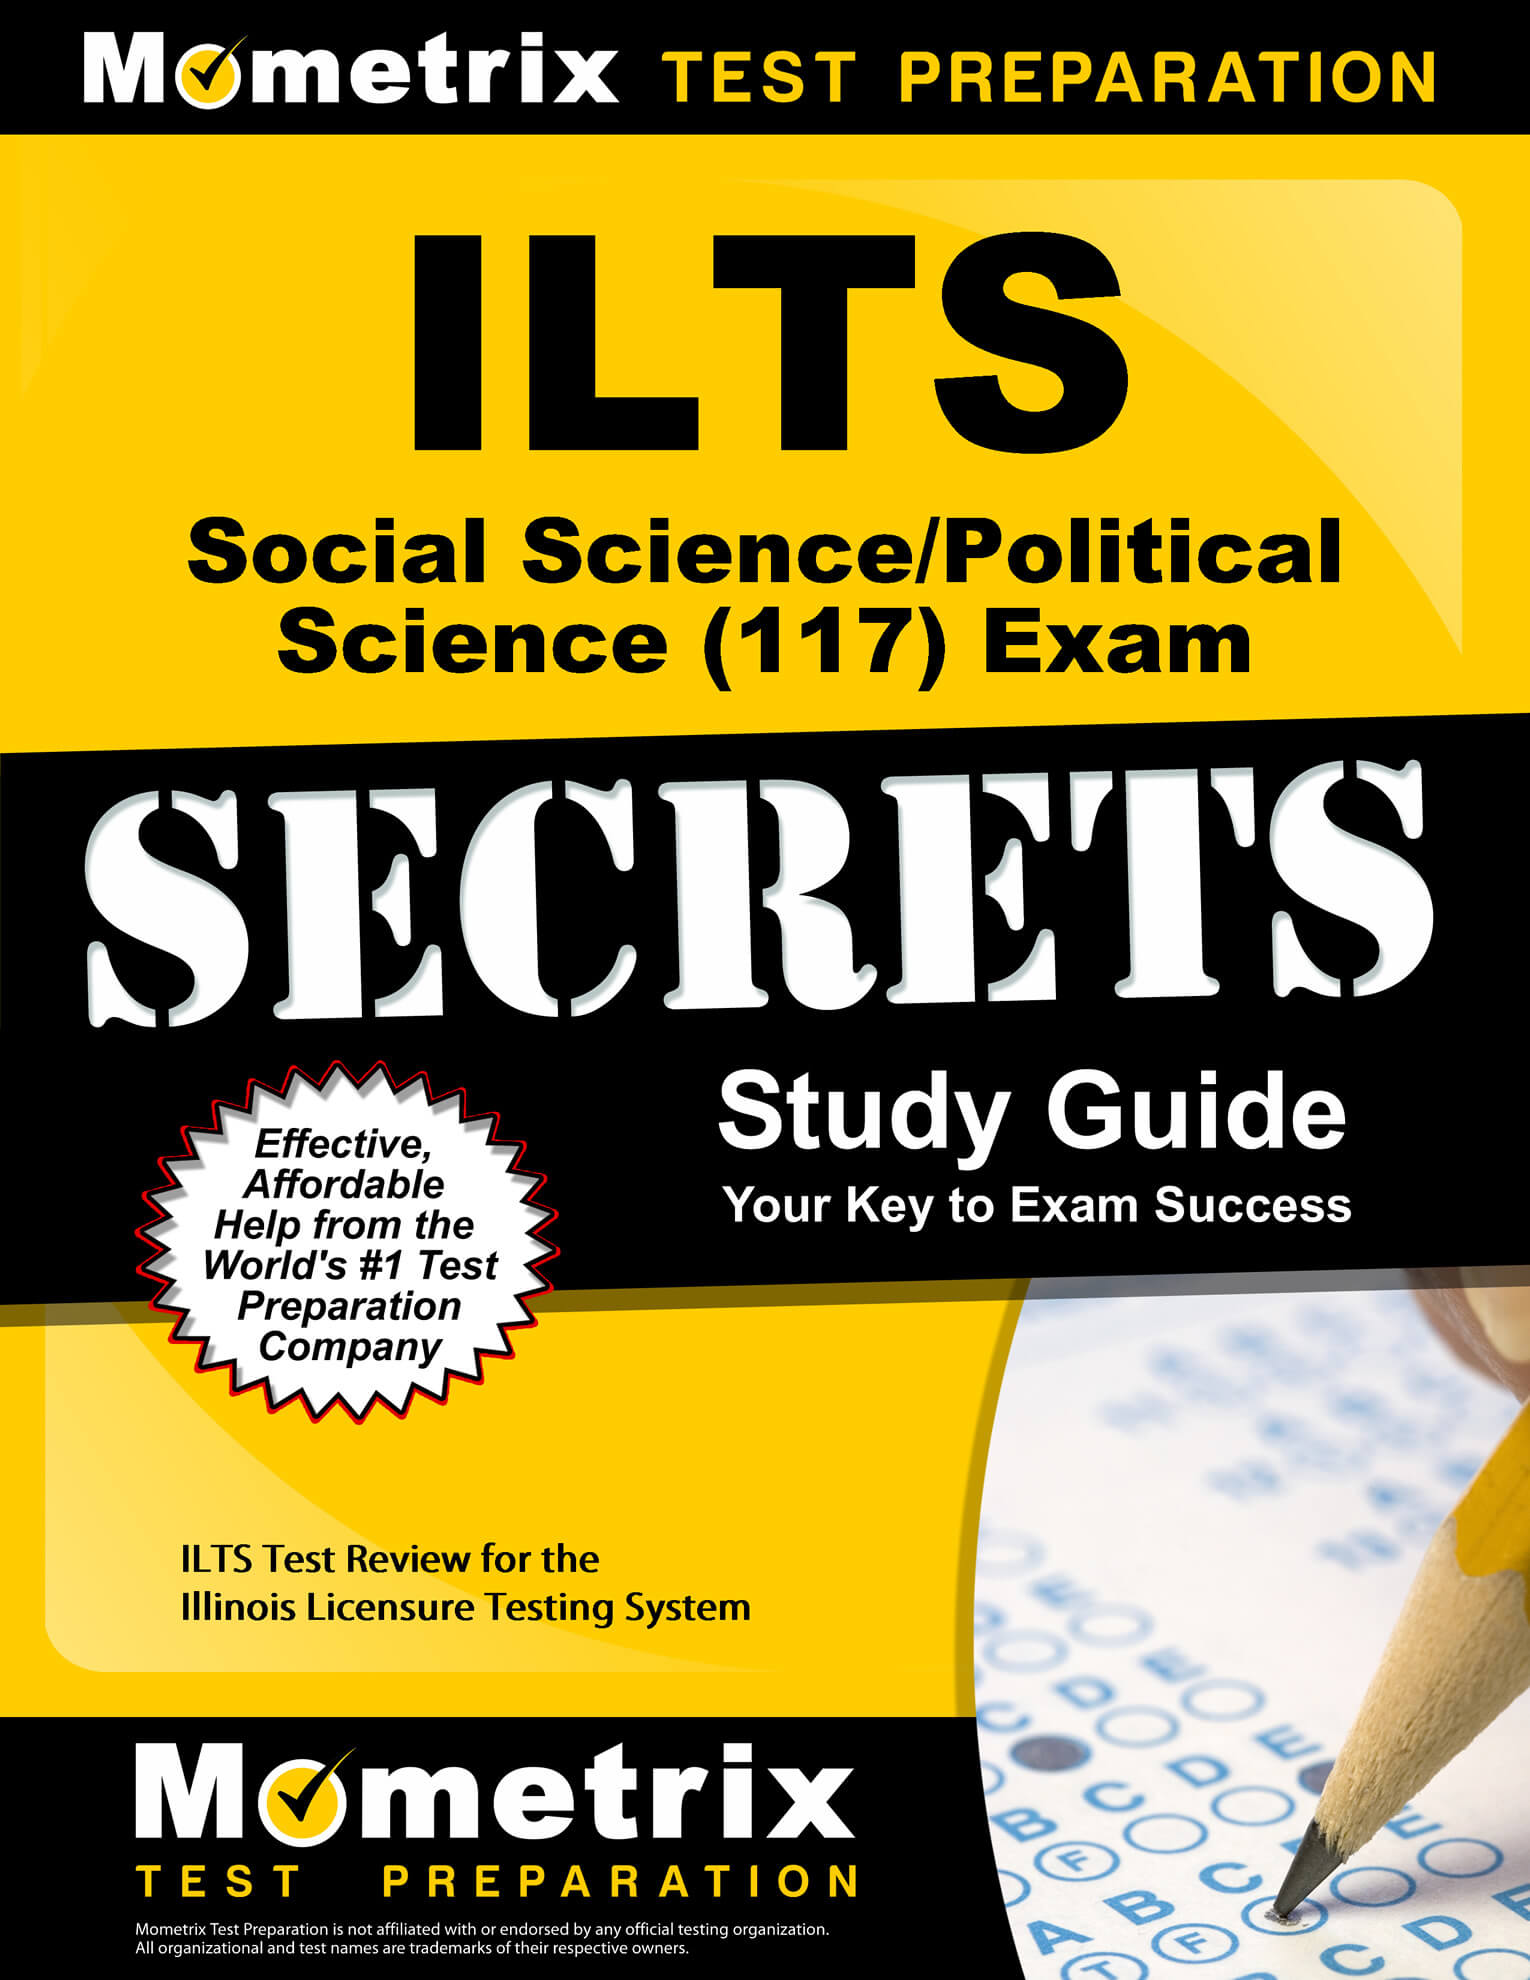 ILTS Social Science: Political Science Study Guide